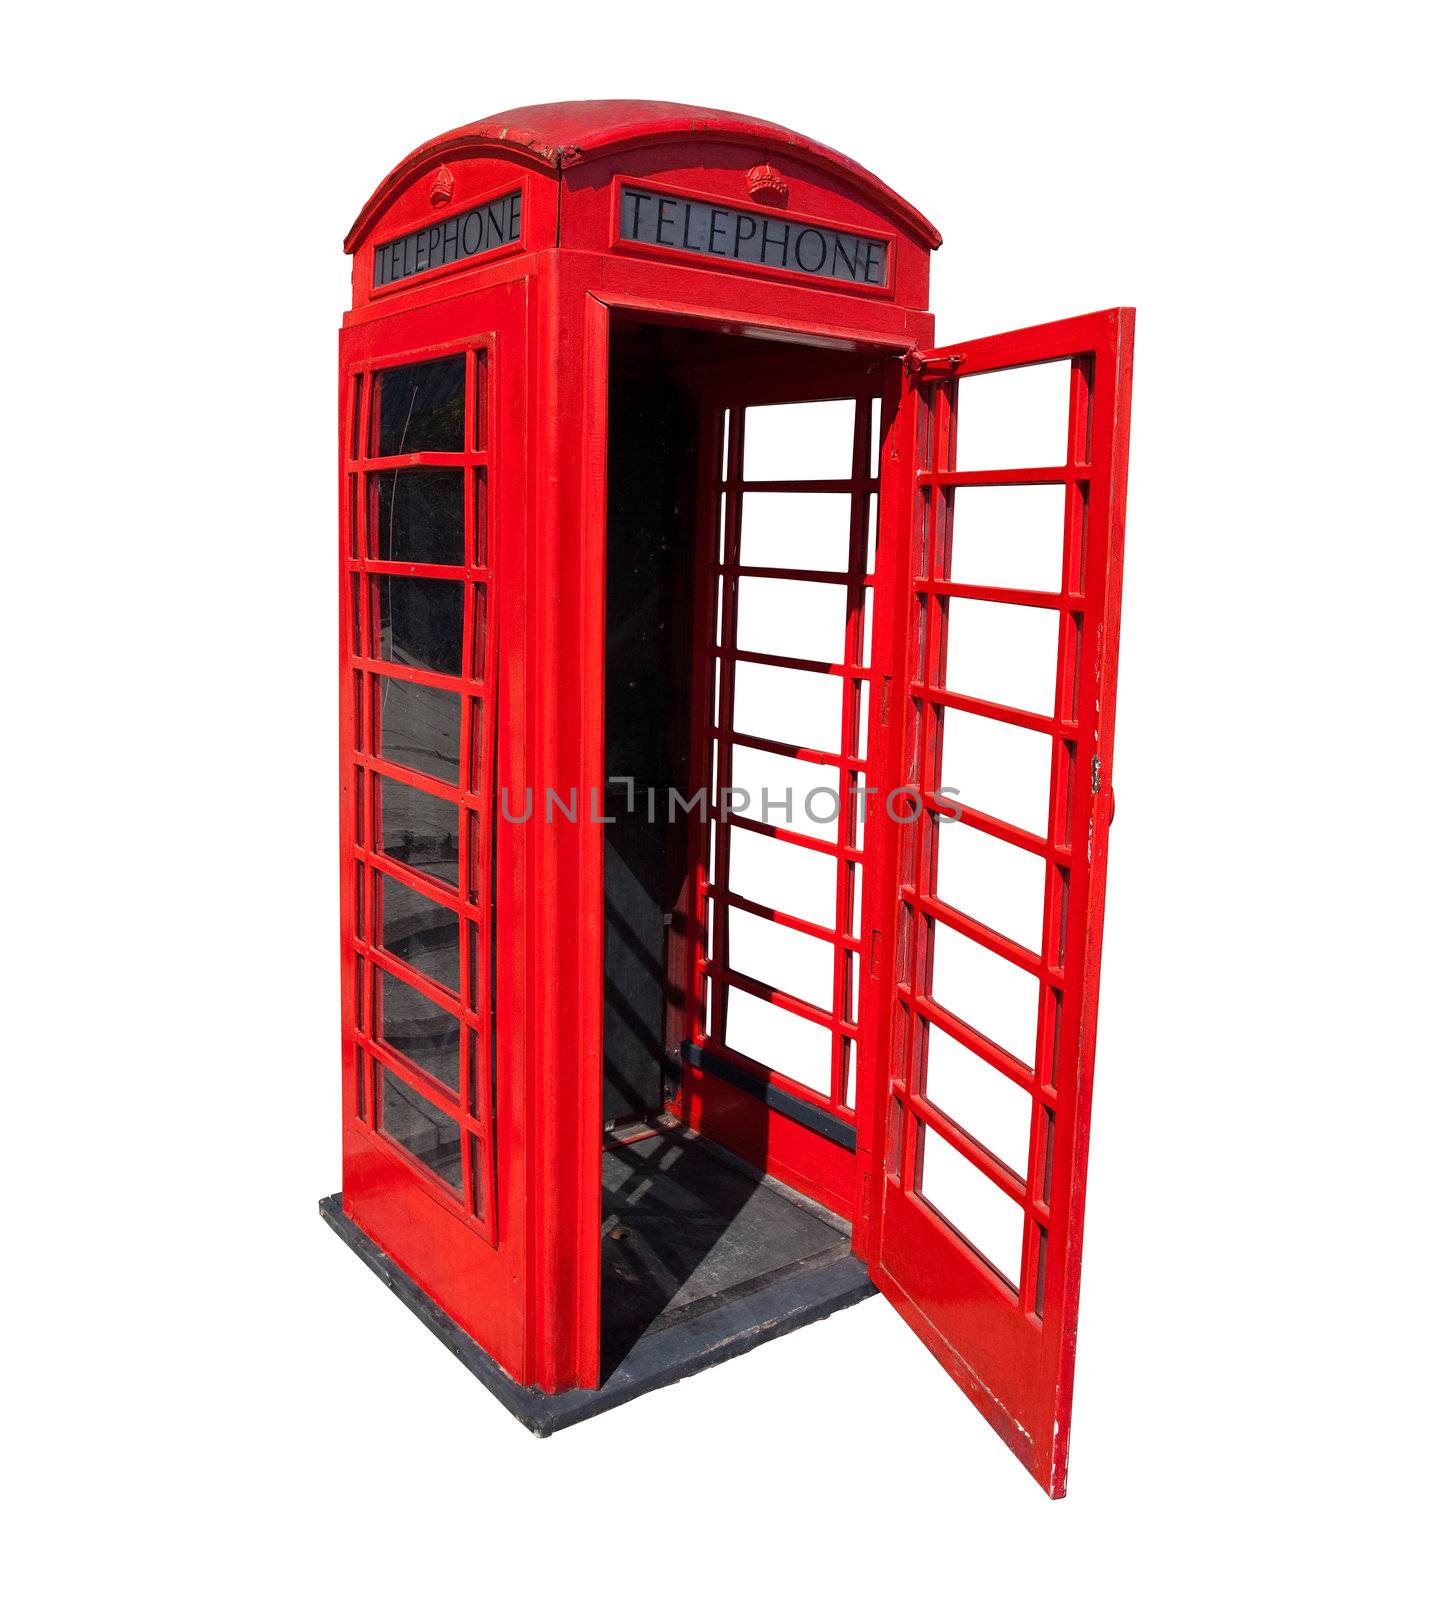 Old red phone booth with open door in London isolated with clipping path